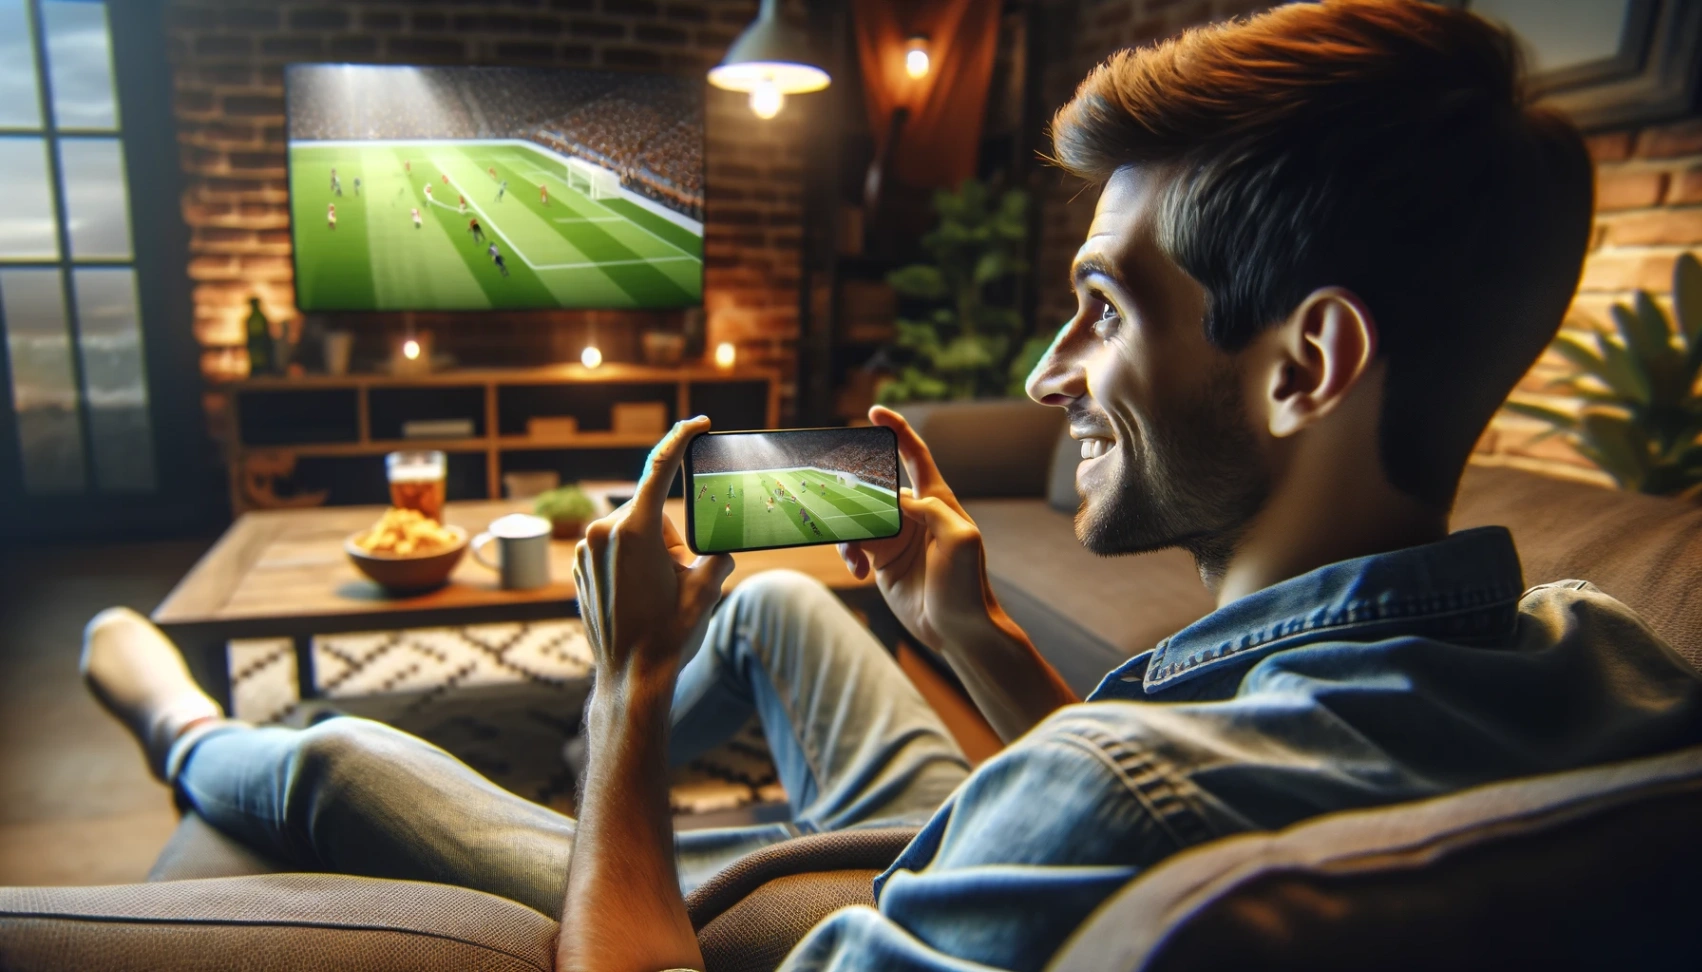 App to Watch Soccer Online - Learn How to Download